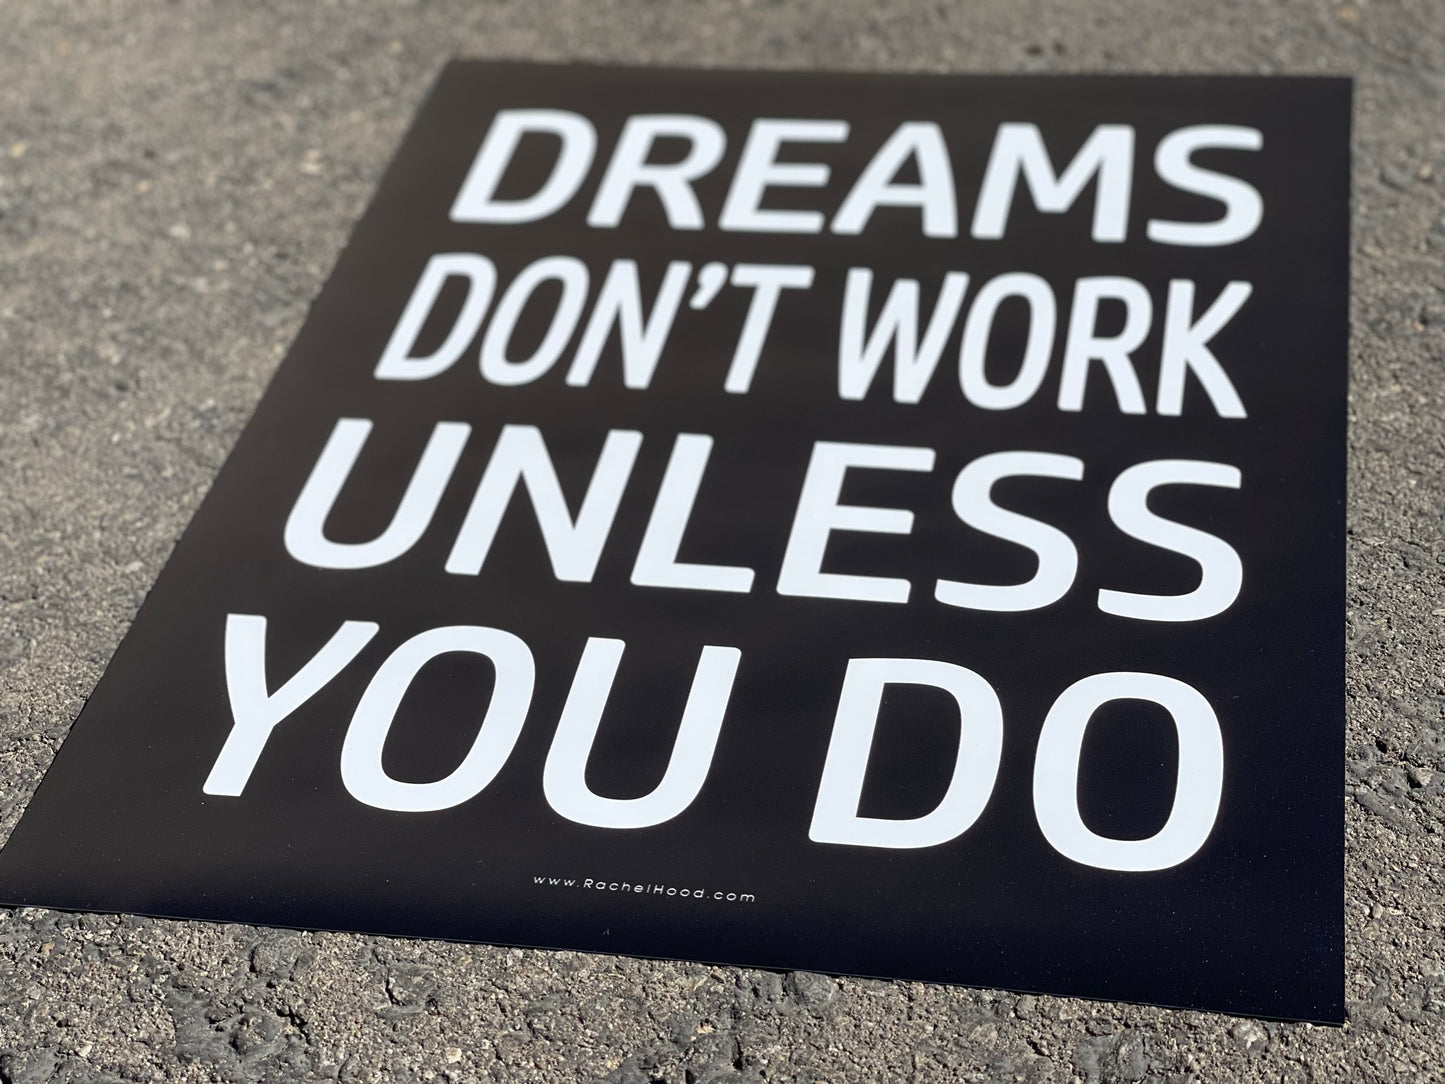 Dreams Don't Work Unless You Do Poster